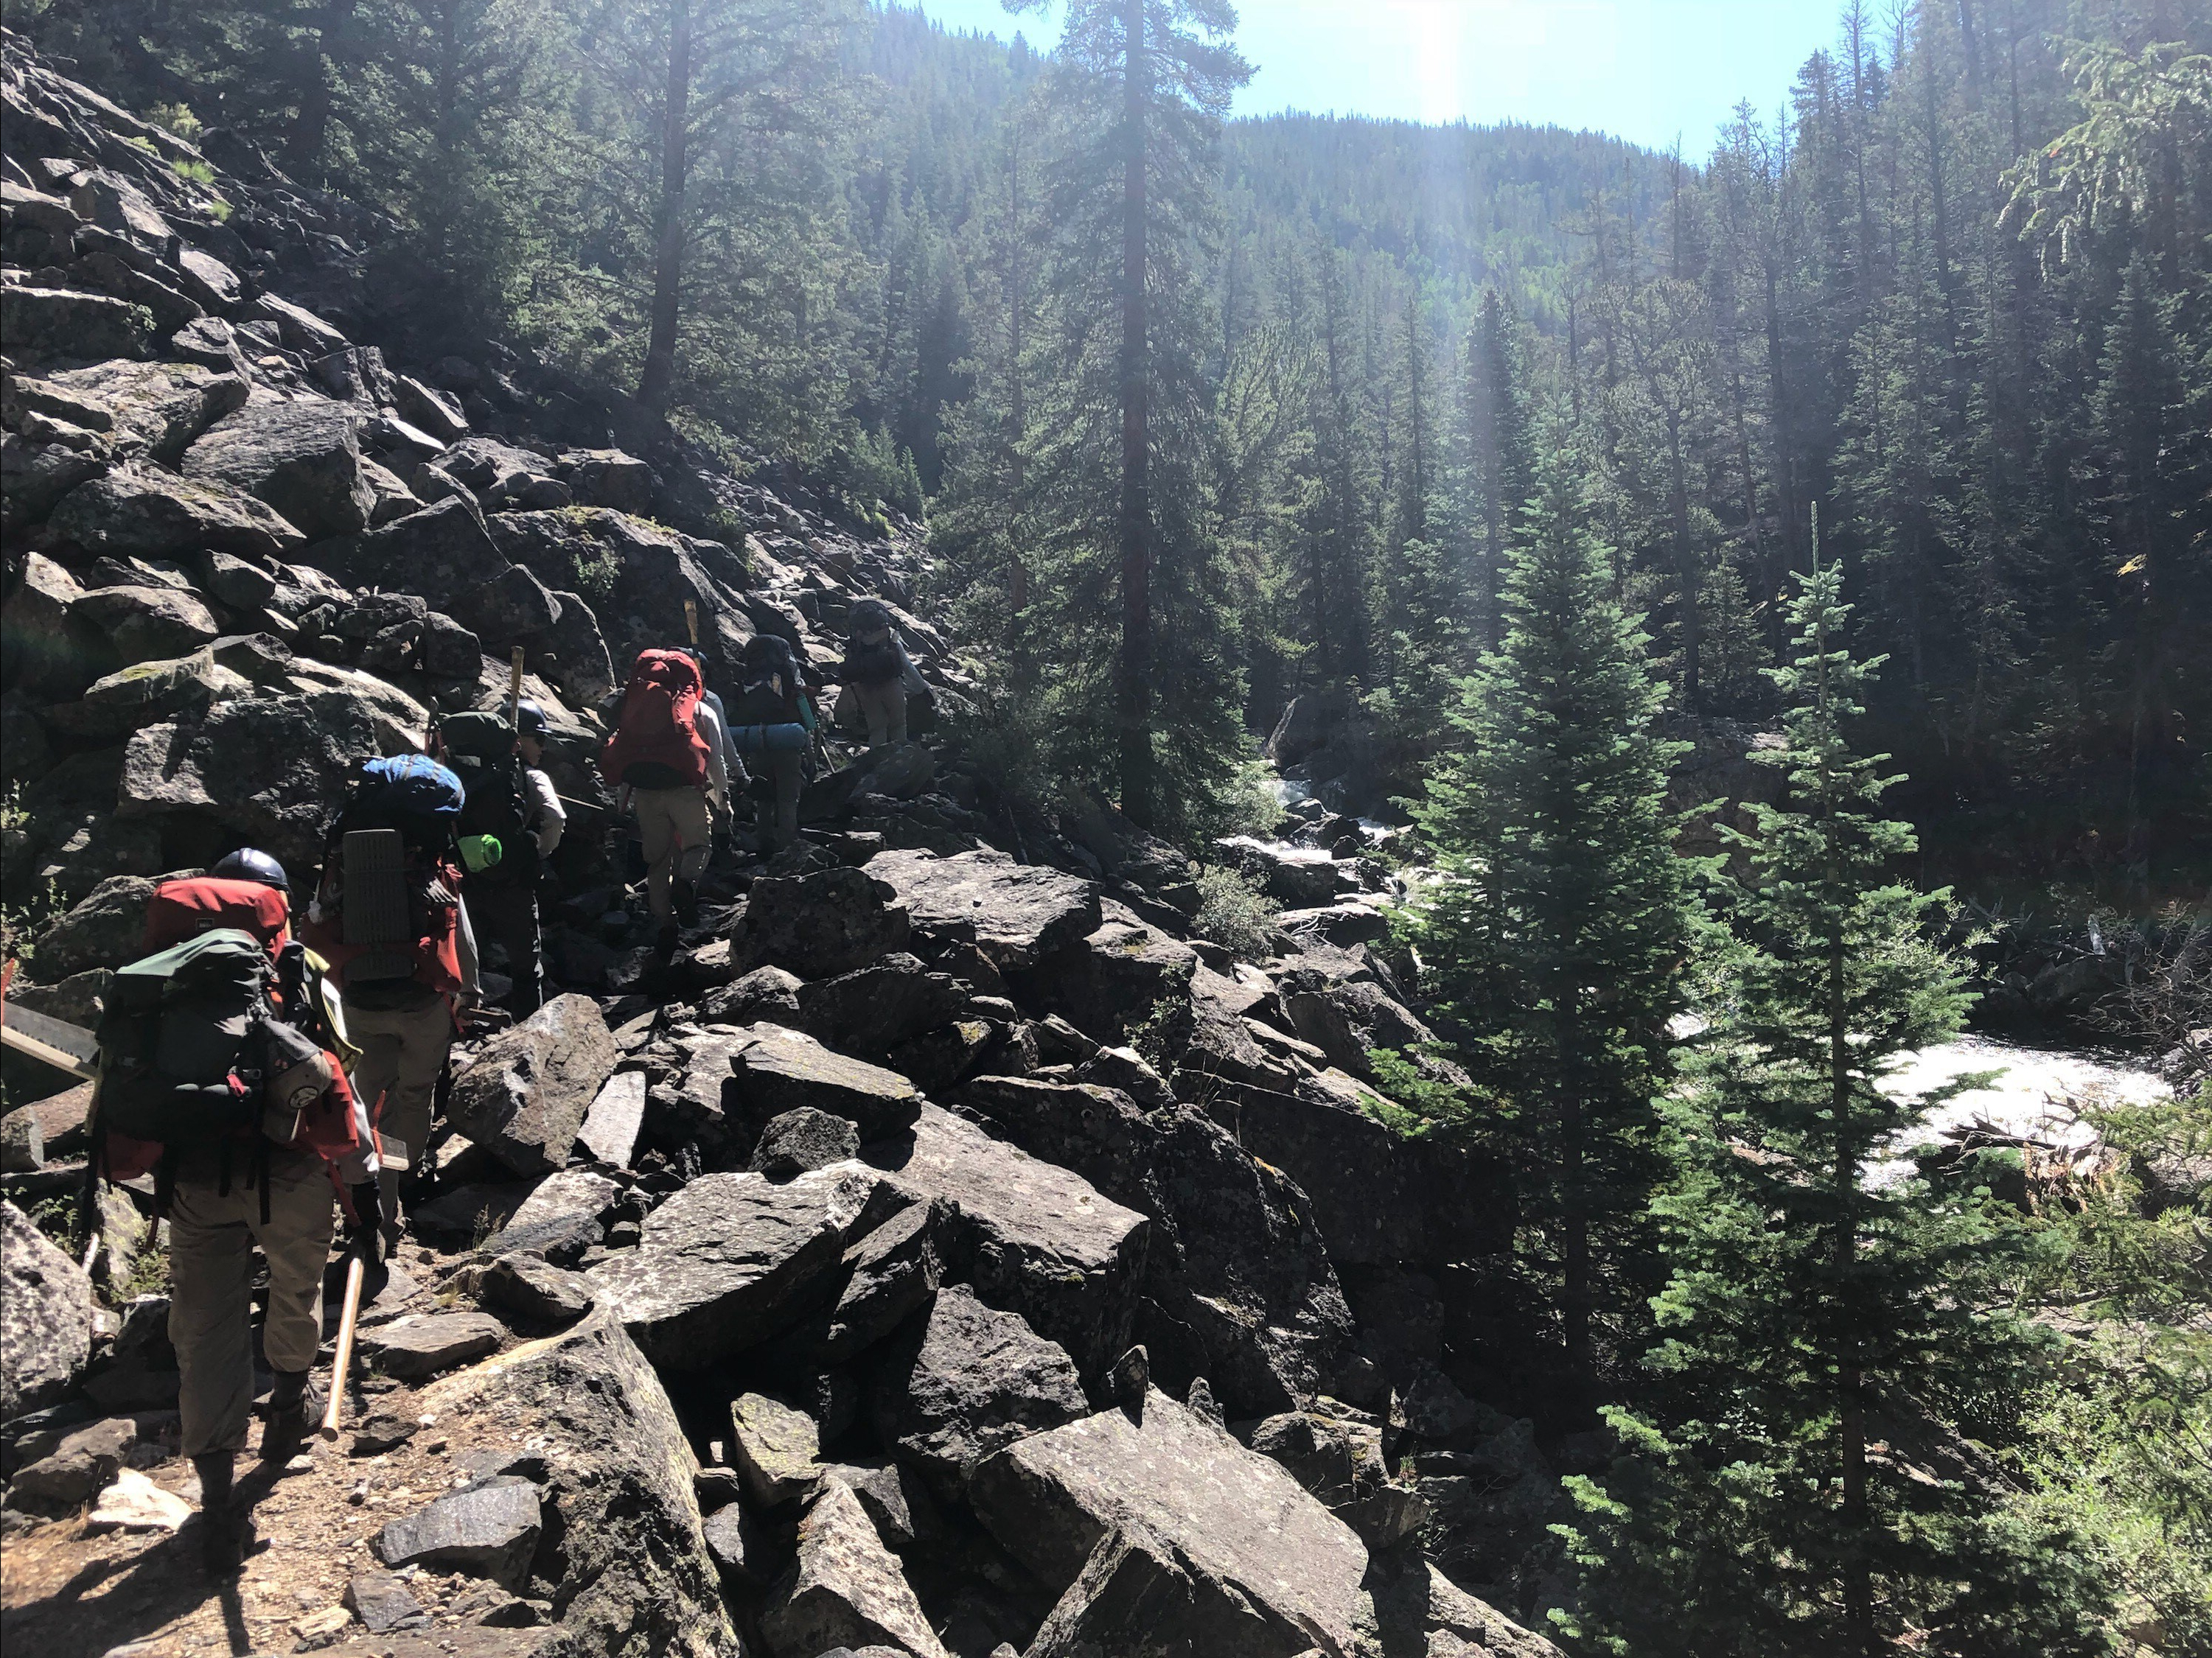 Hikers with backpacks trekking along a rocky mountain trail